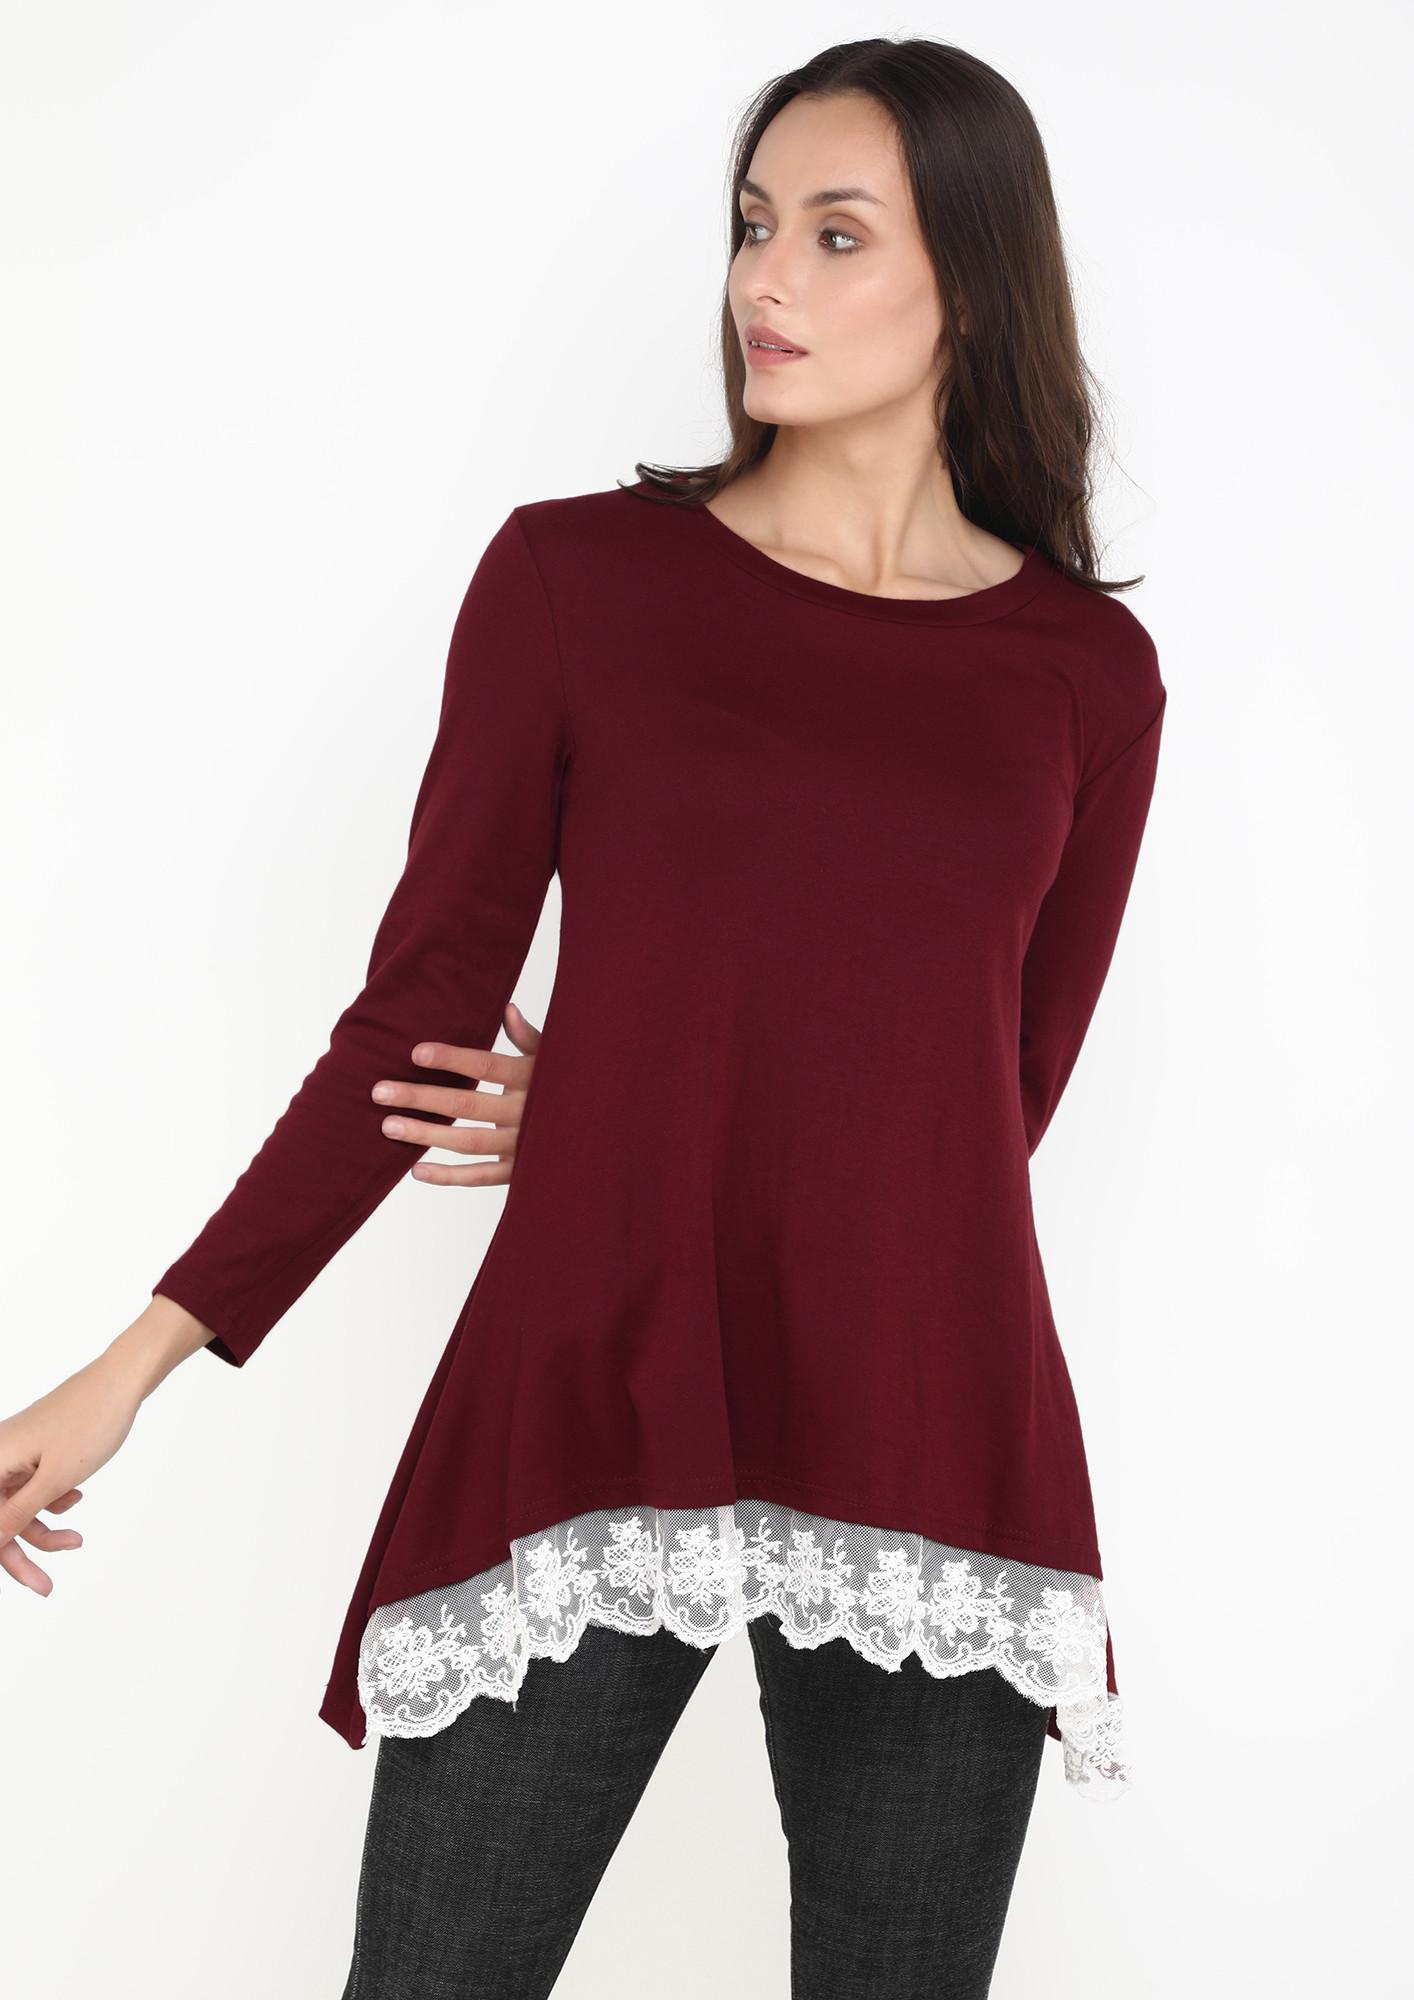 LACE ME UP WINE TUNIC TOP